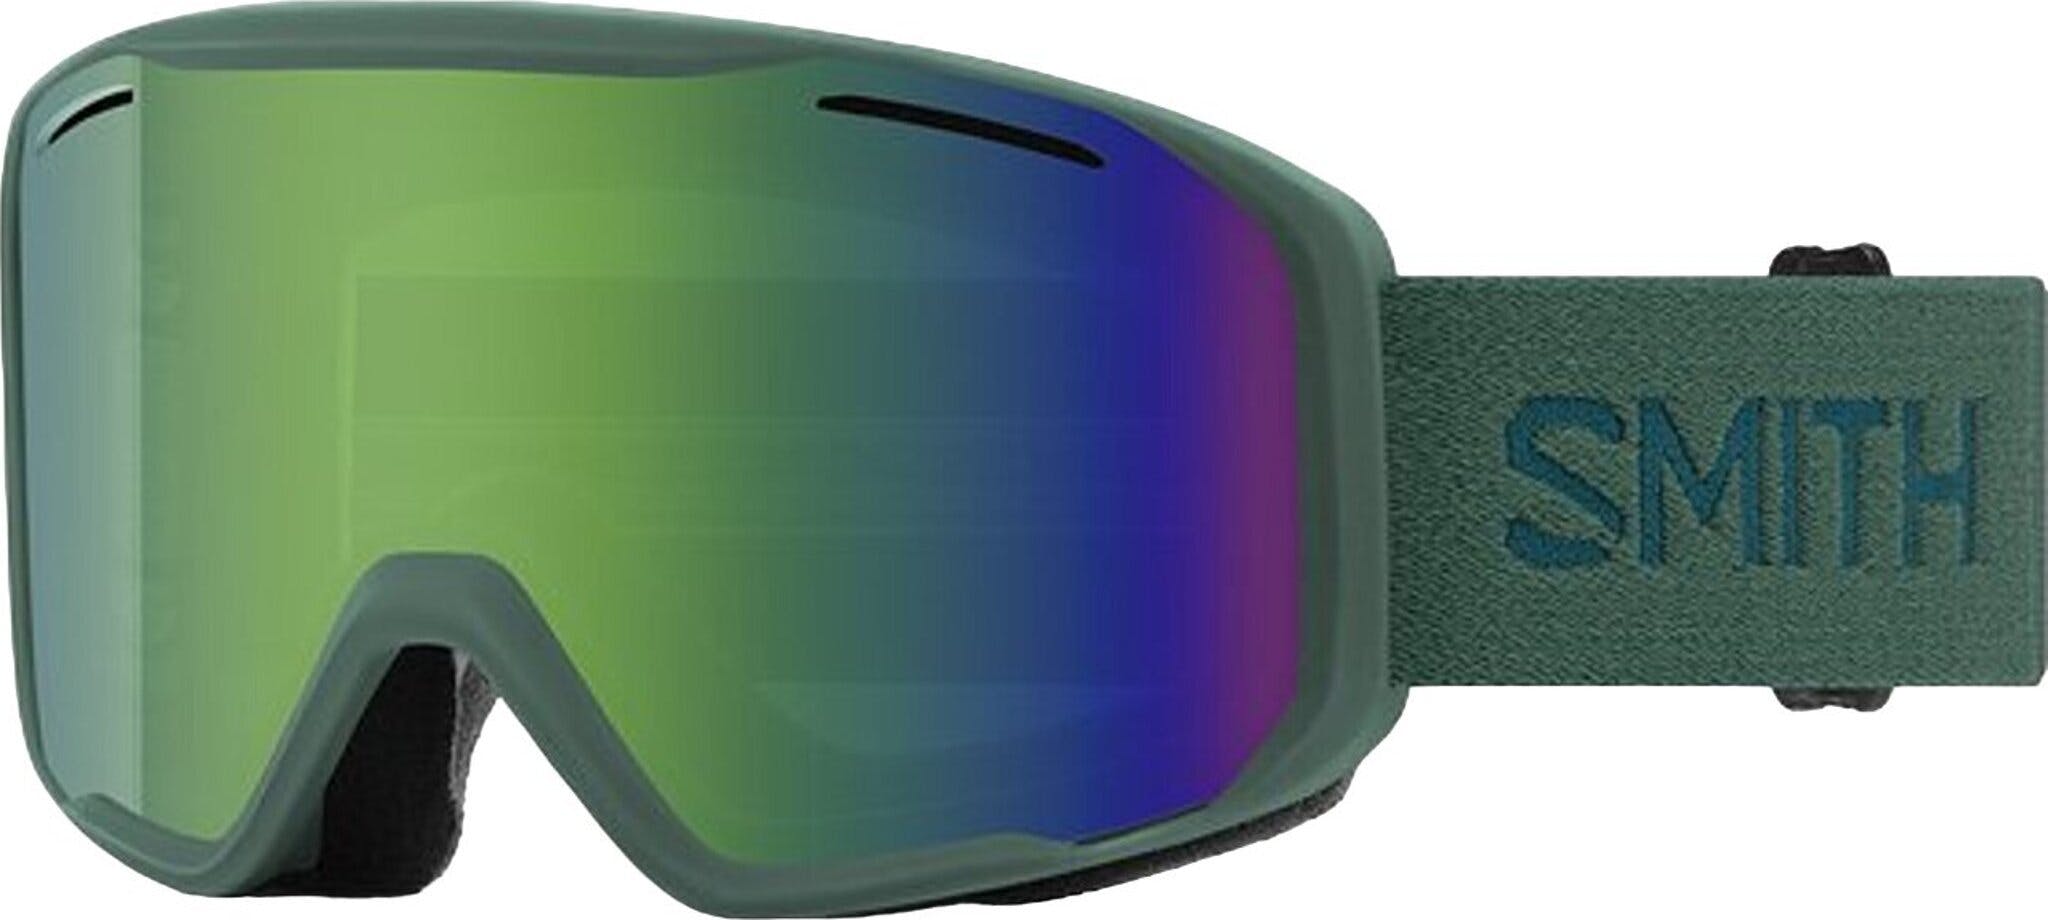 Product image for Blazer Goggles - Men's